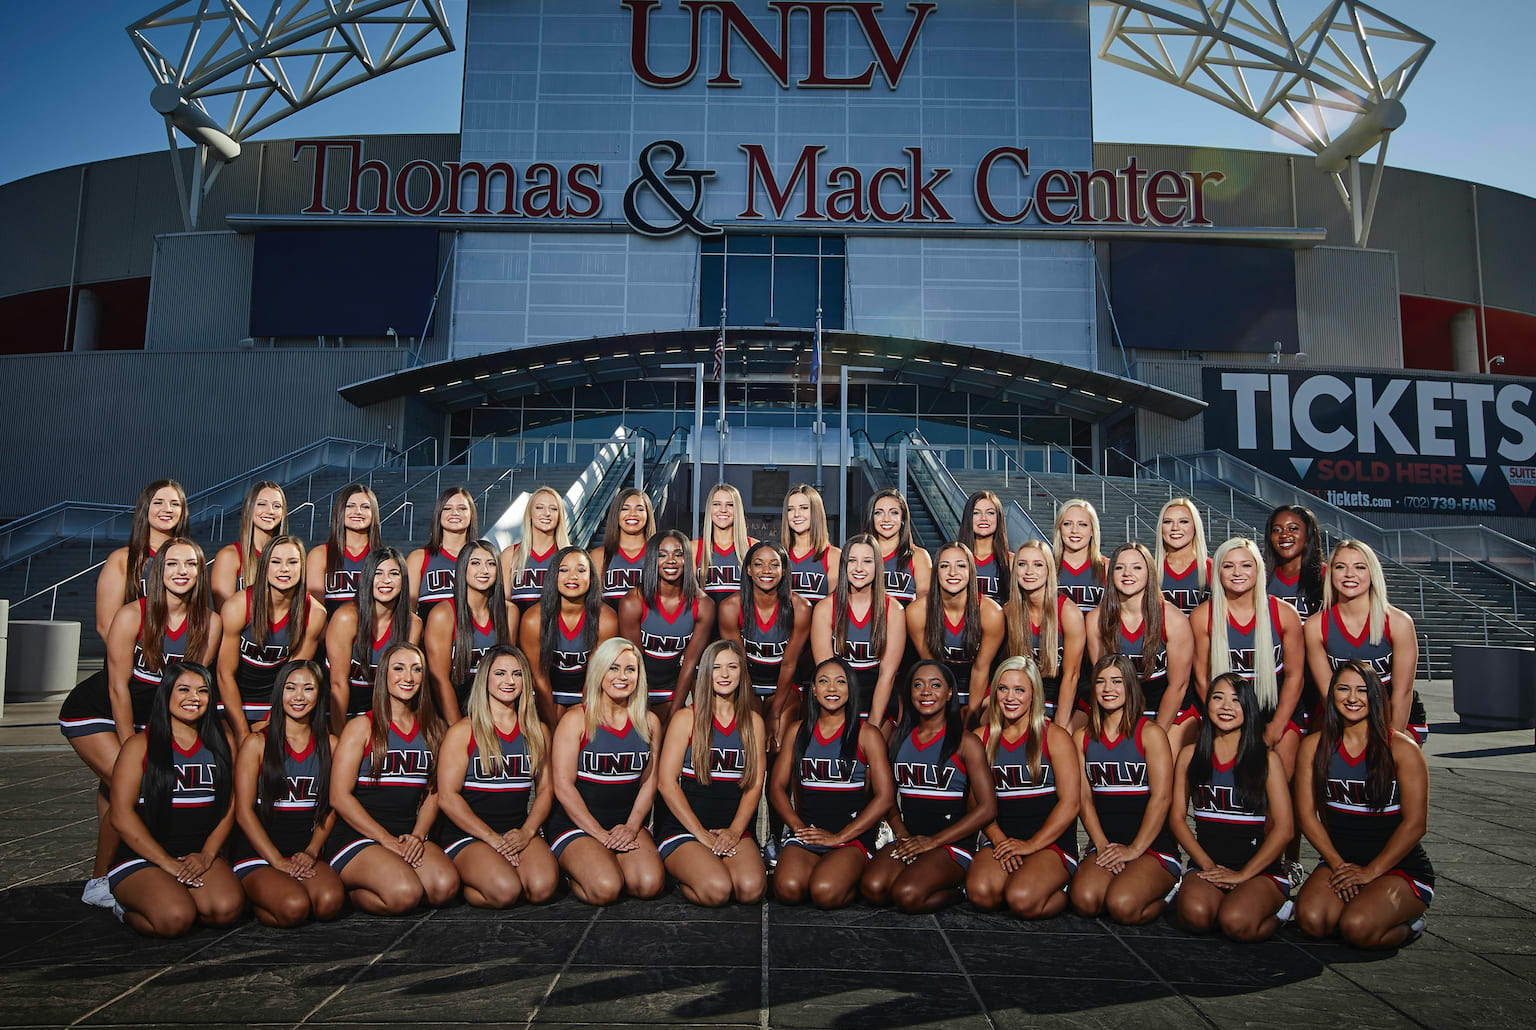 Past Projects Send the UNLV Cheerleaders to Nationals! 2019